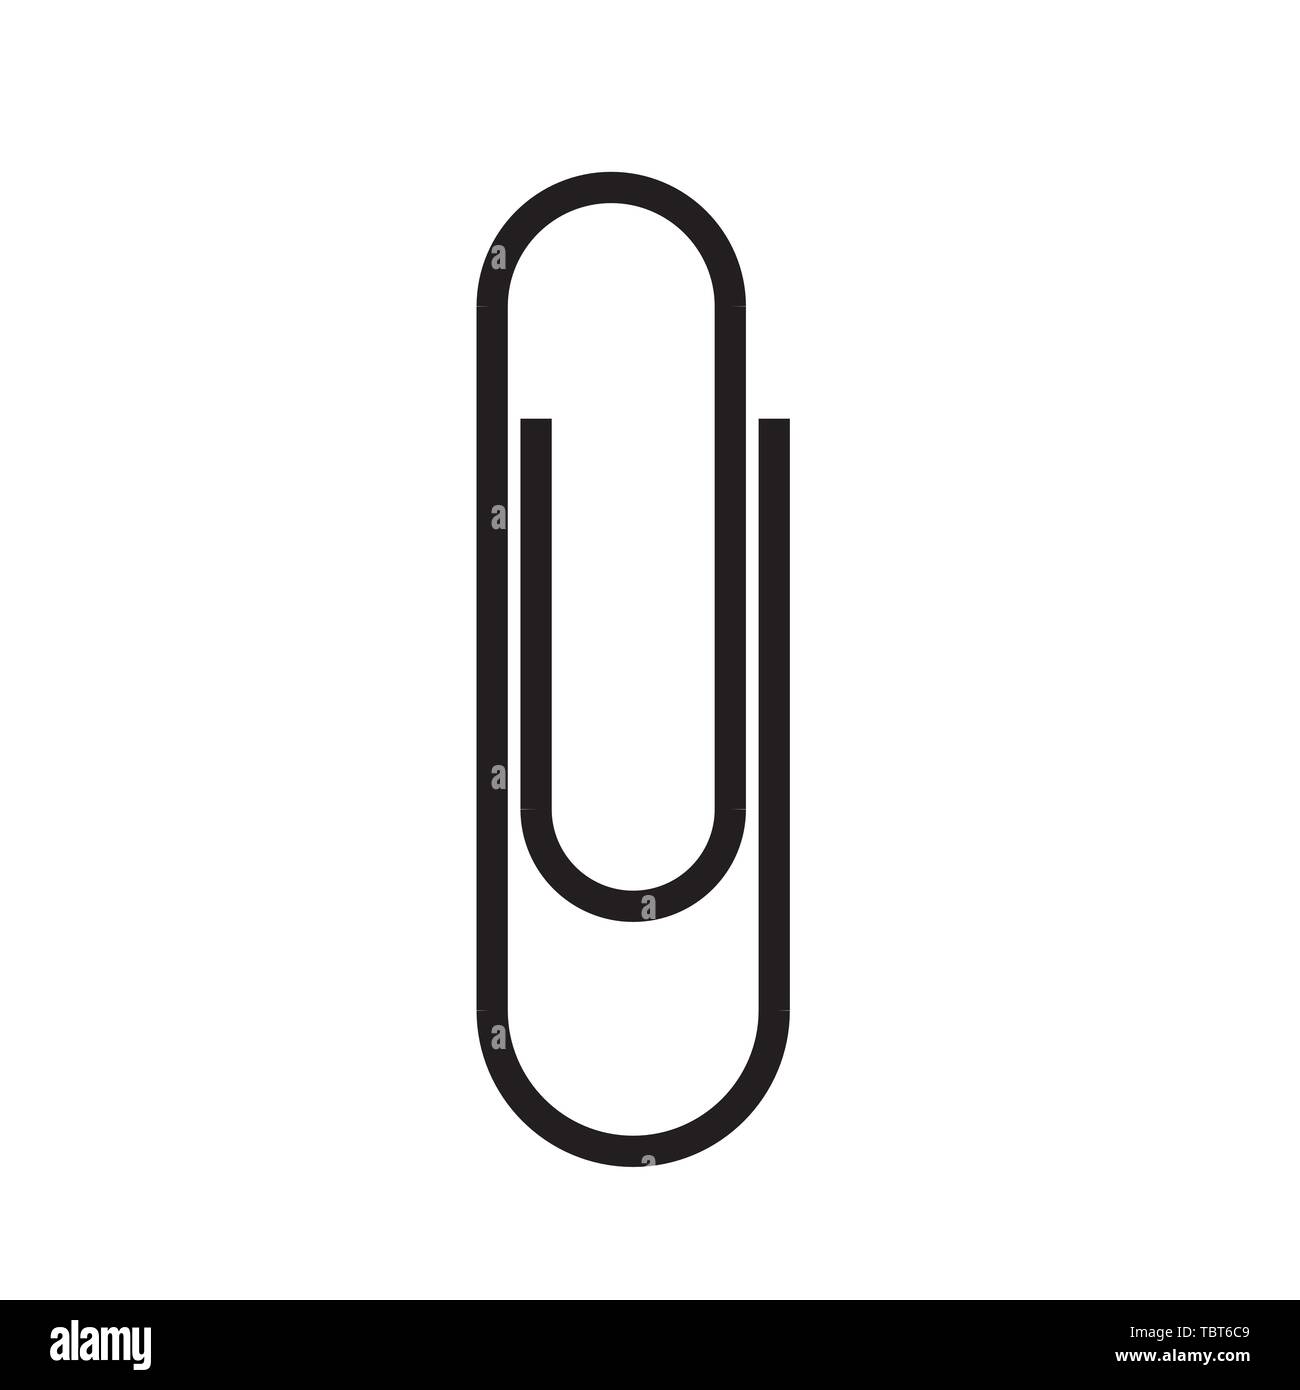 Paper clip attachment silhouette. Paperclip black icon. Attach file business document. Vector illustration isolated on white background Stock Vector